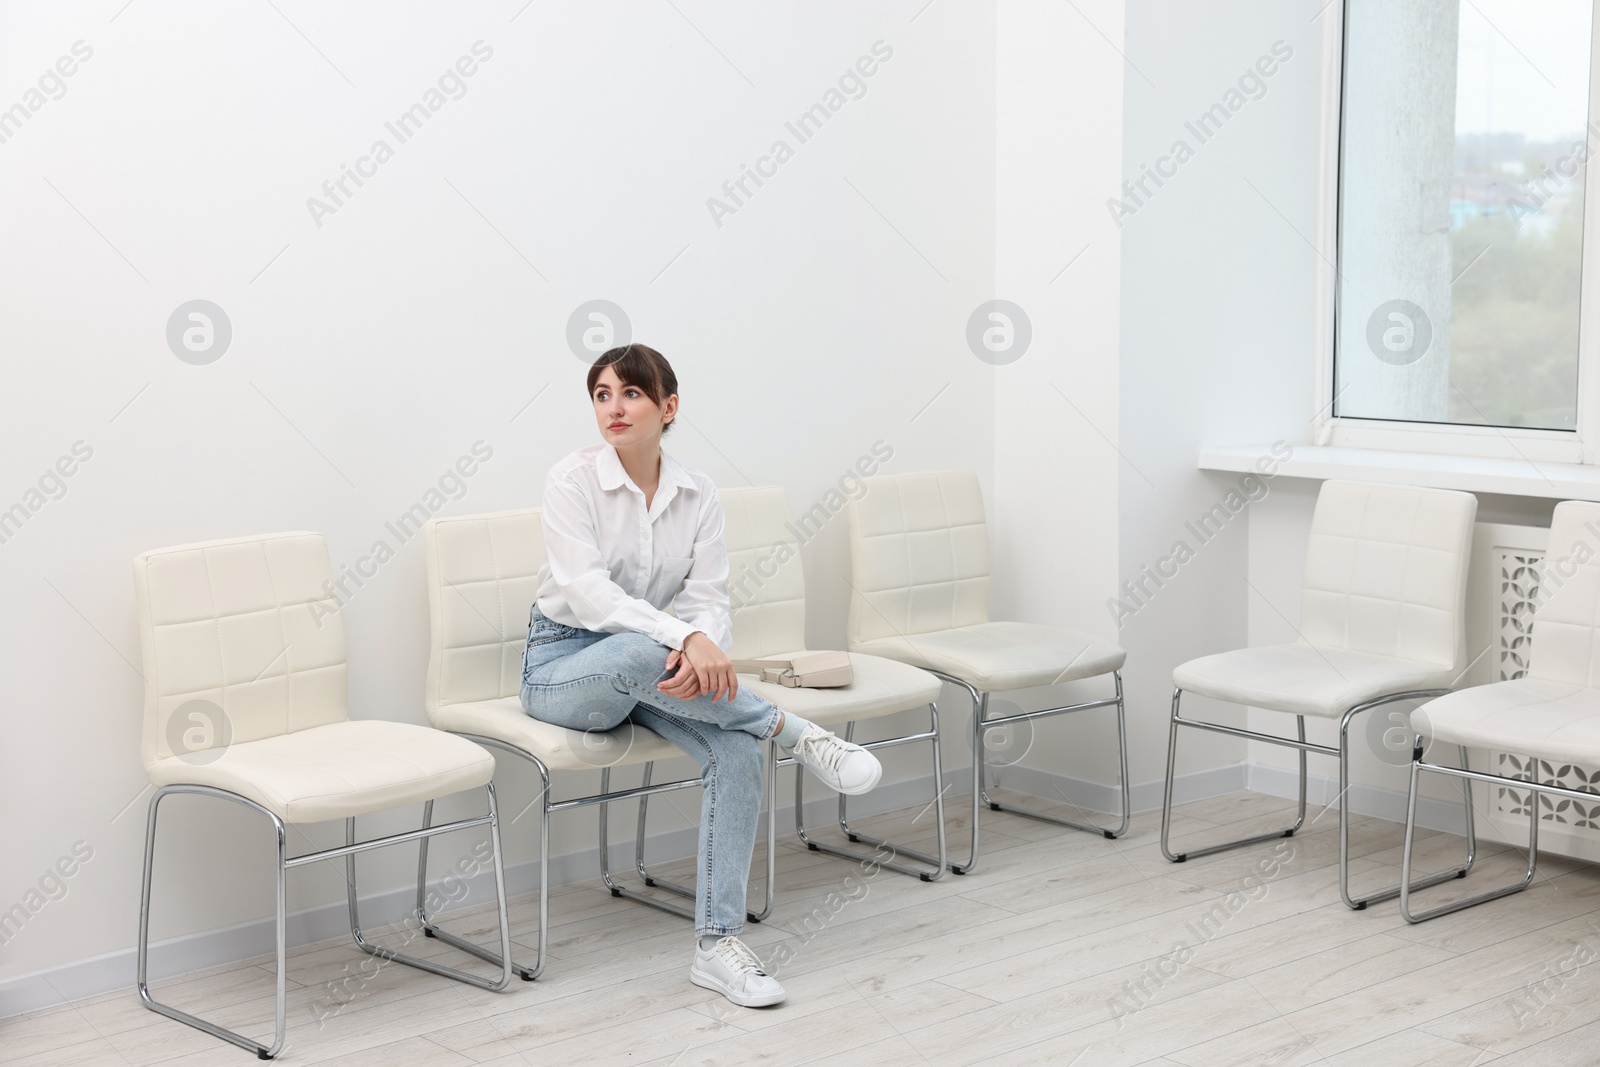 Photo of Woman sitting on chair and waiting for job interview indoors